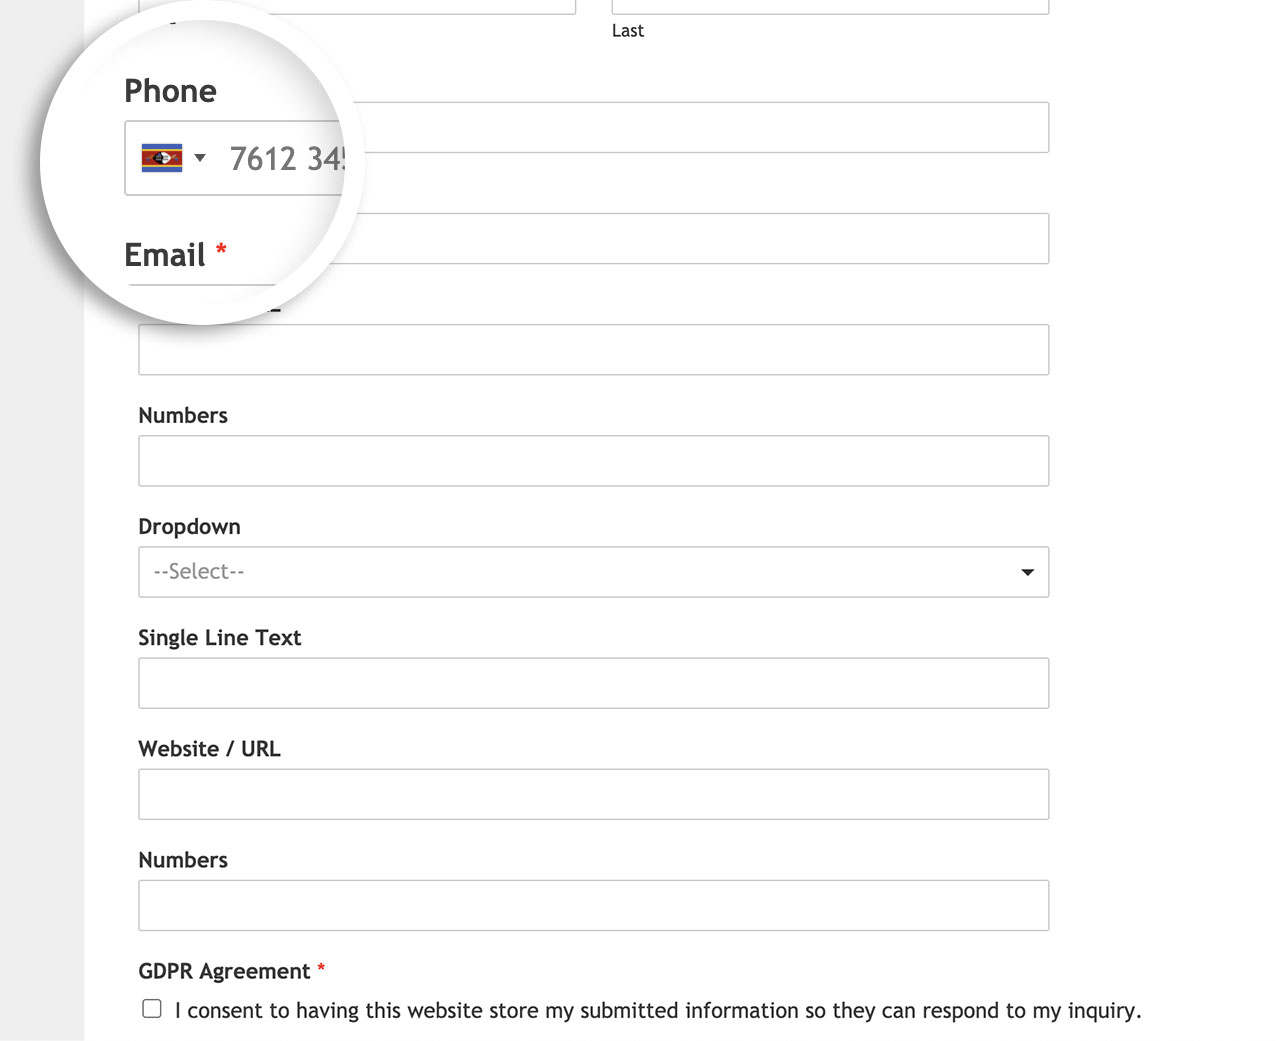 Now a default flag will be set on the Smart Phone form field